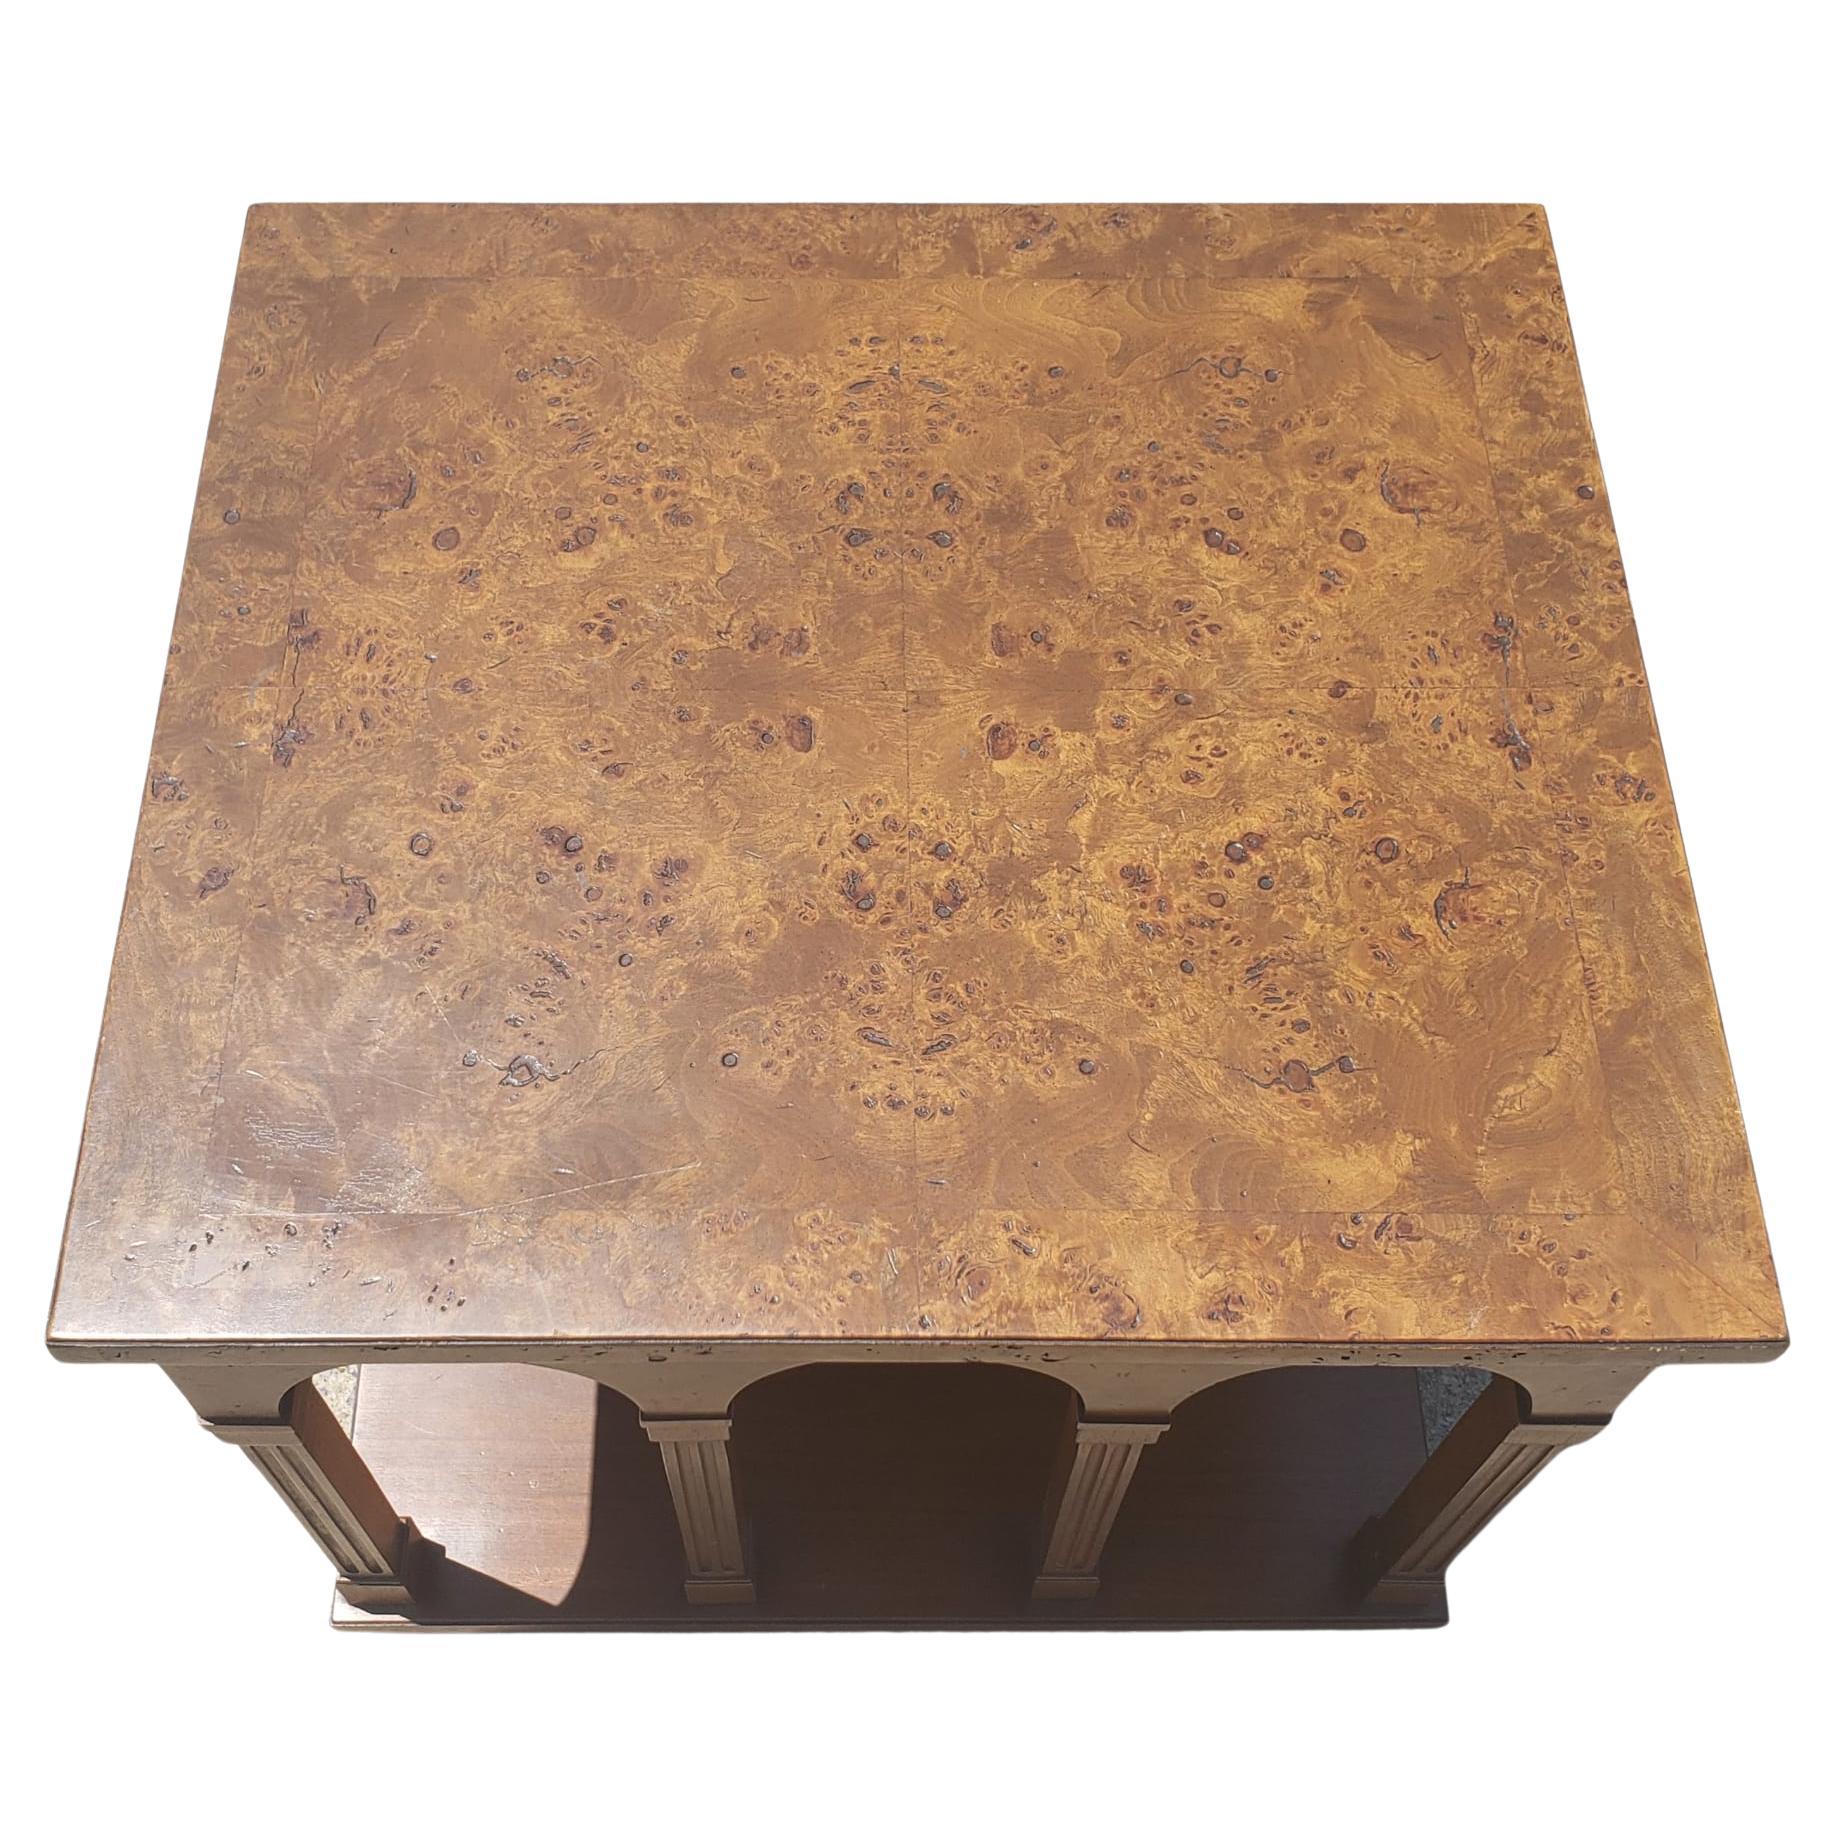 Tomlinson Mid-Century Modern burl walnut two tier tower side table in very good vintage condition. Table measures 22.5 inches in width, 22.5 inches in depth and stands 21 inches tall.